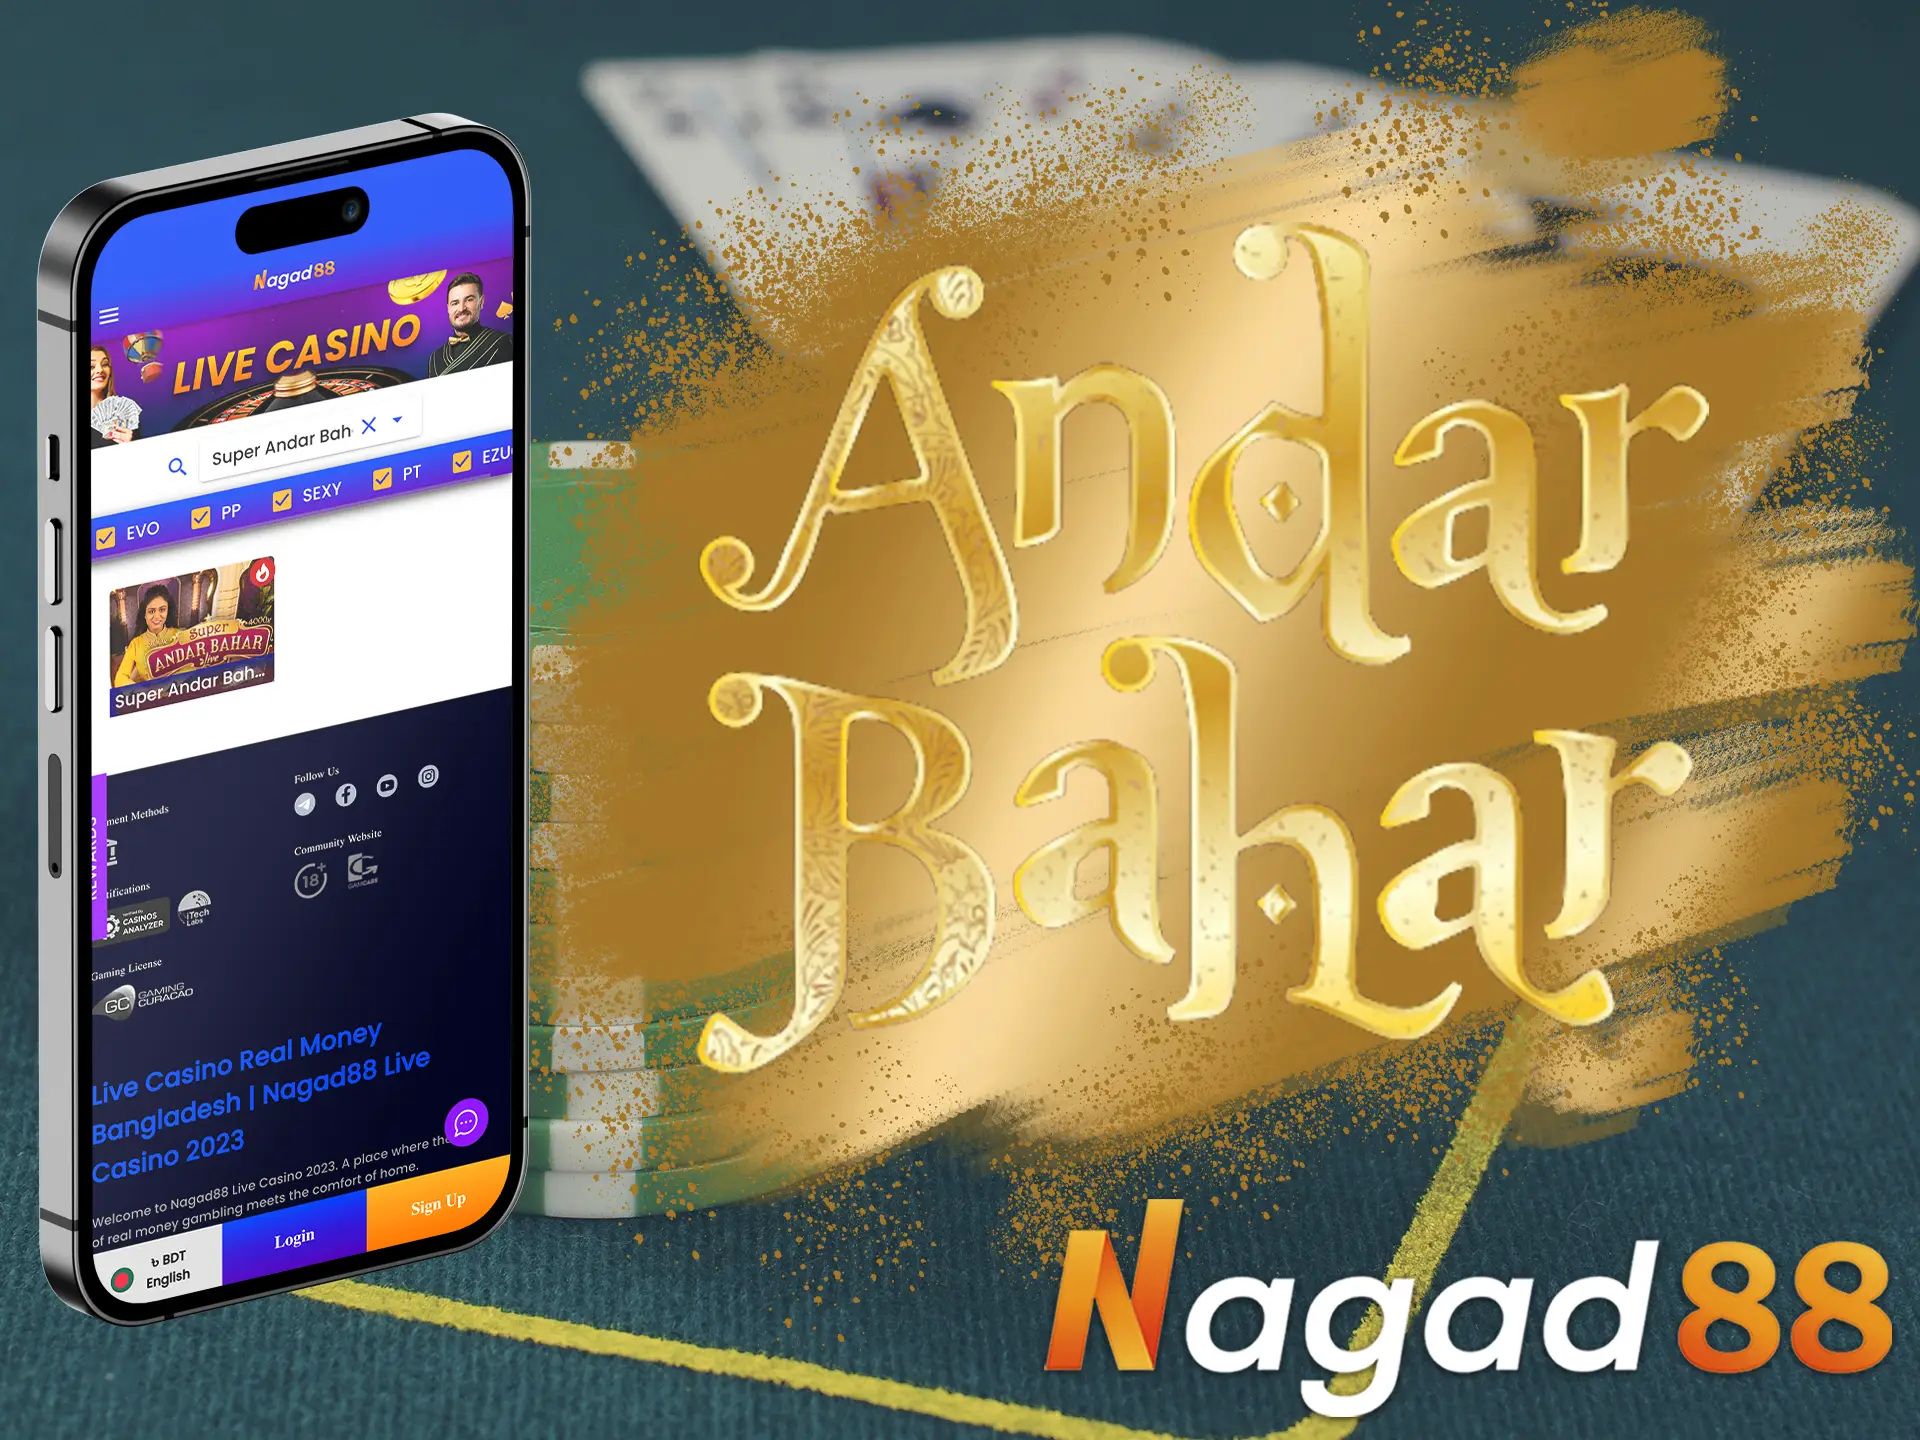 Find the same cards to win in this wonderful section of Nagad88.